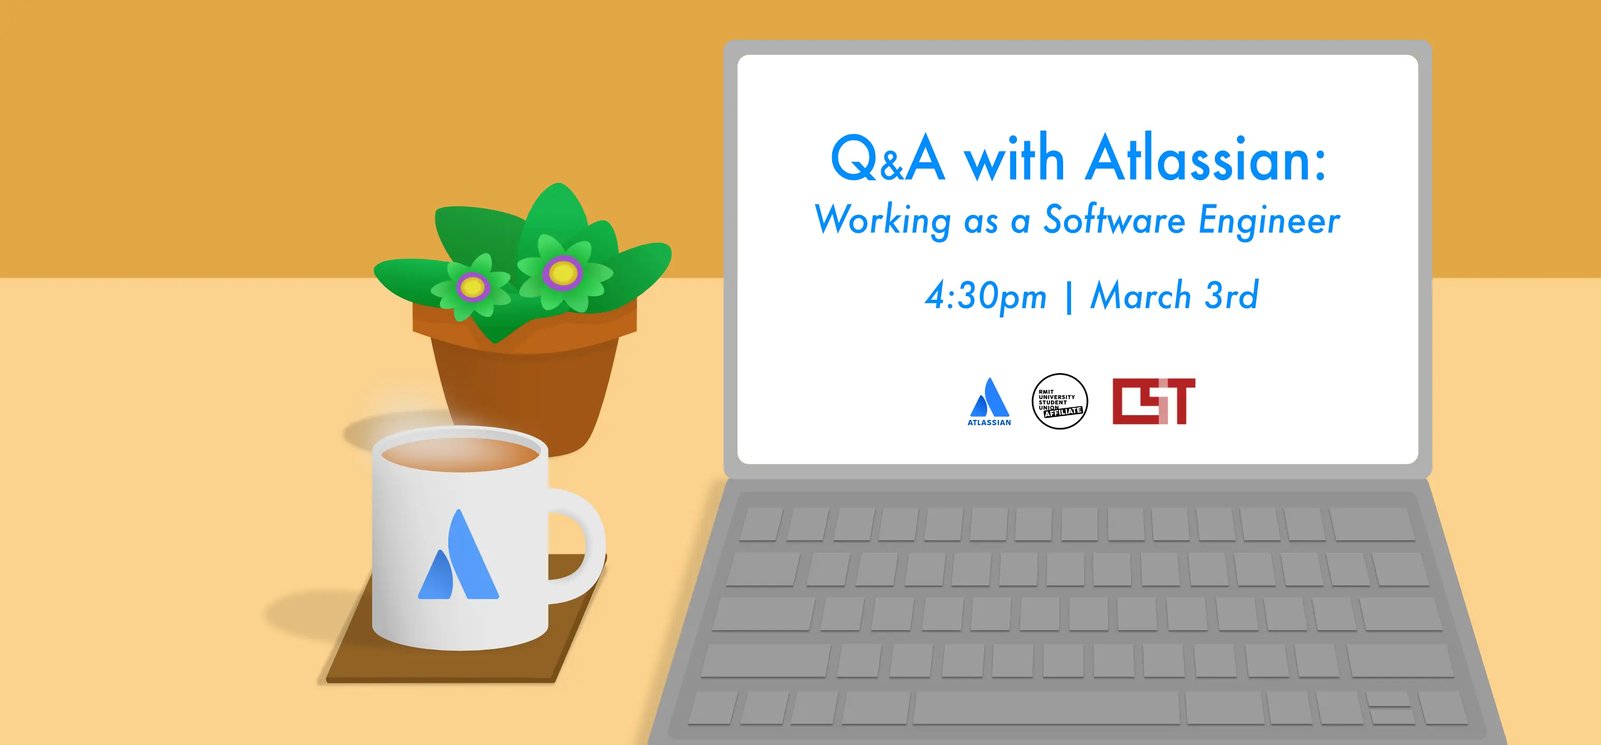 Q&A with Atlassian